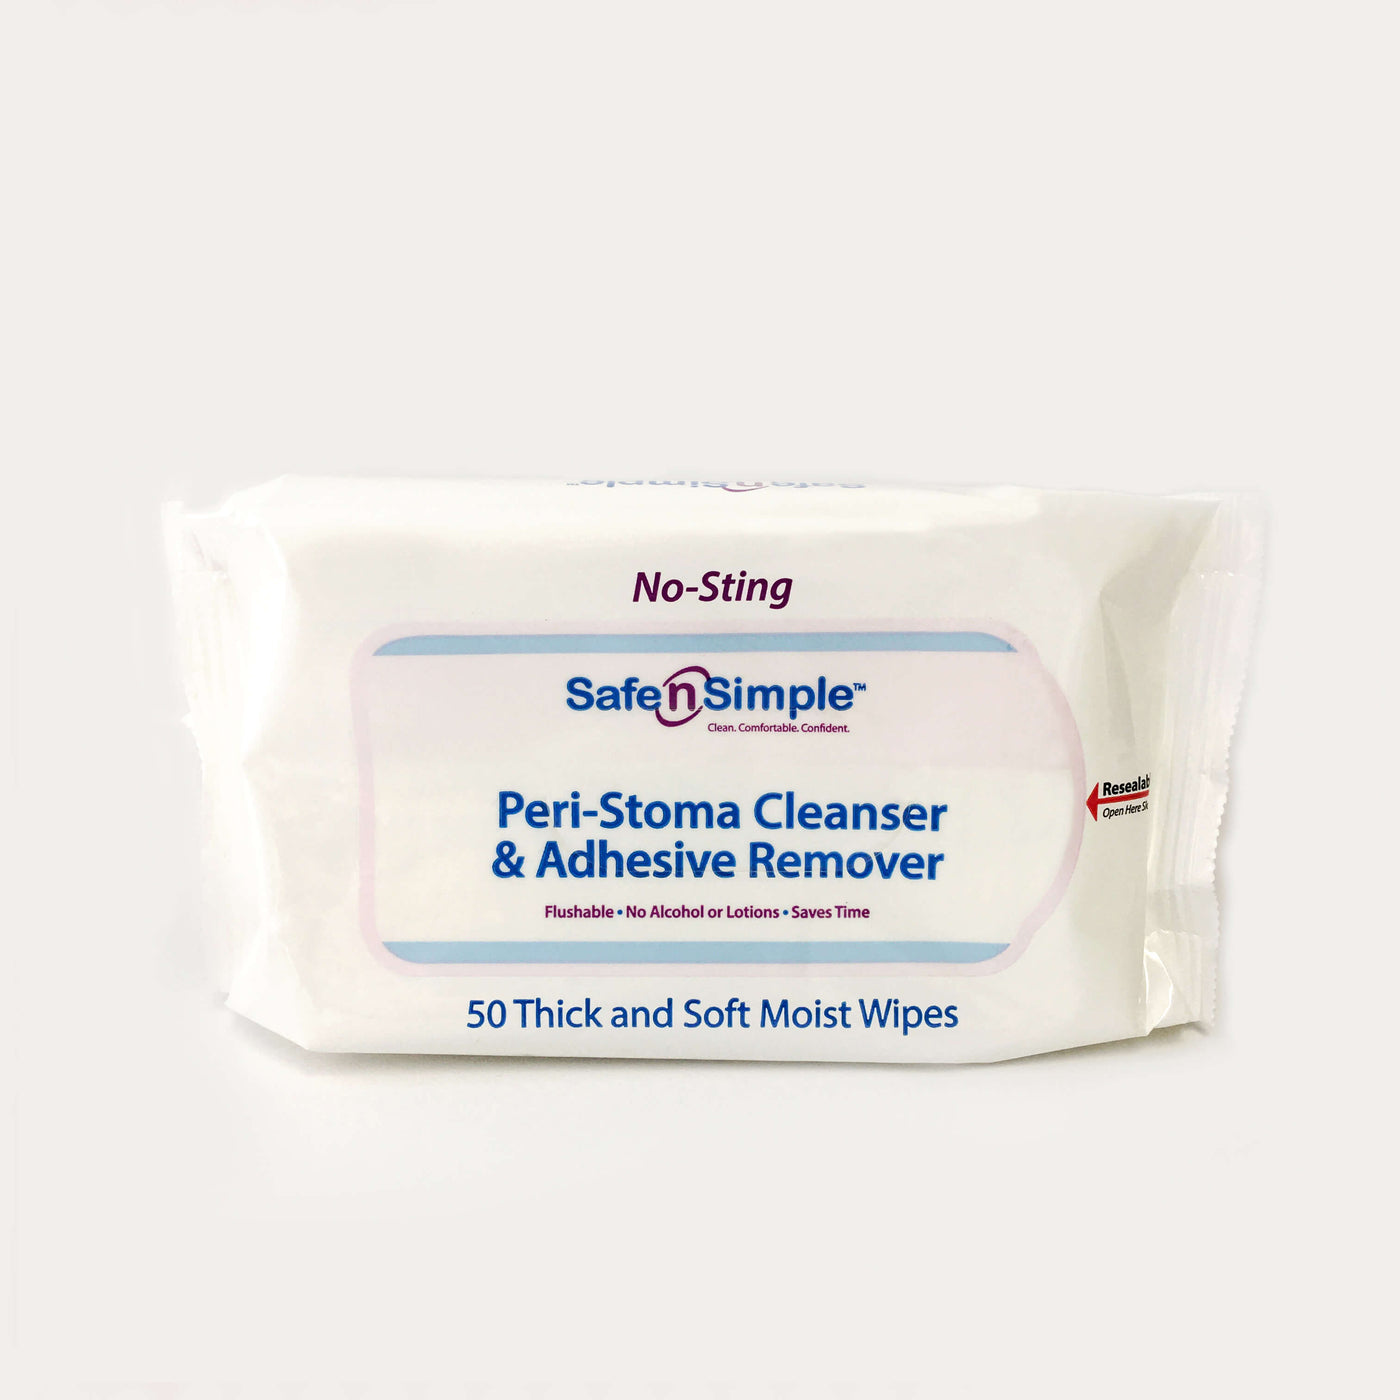 SafenSimple™Peri-Stoma Cleanser & Adhesive Remover ...